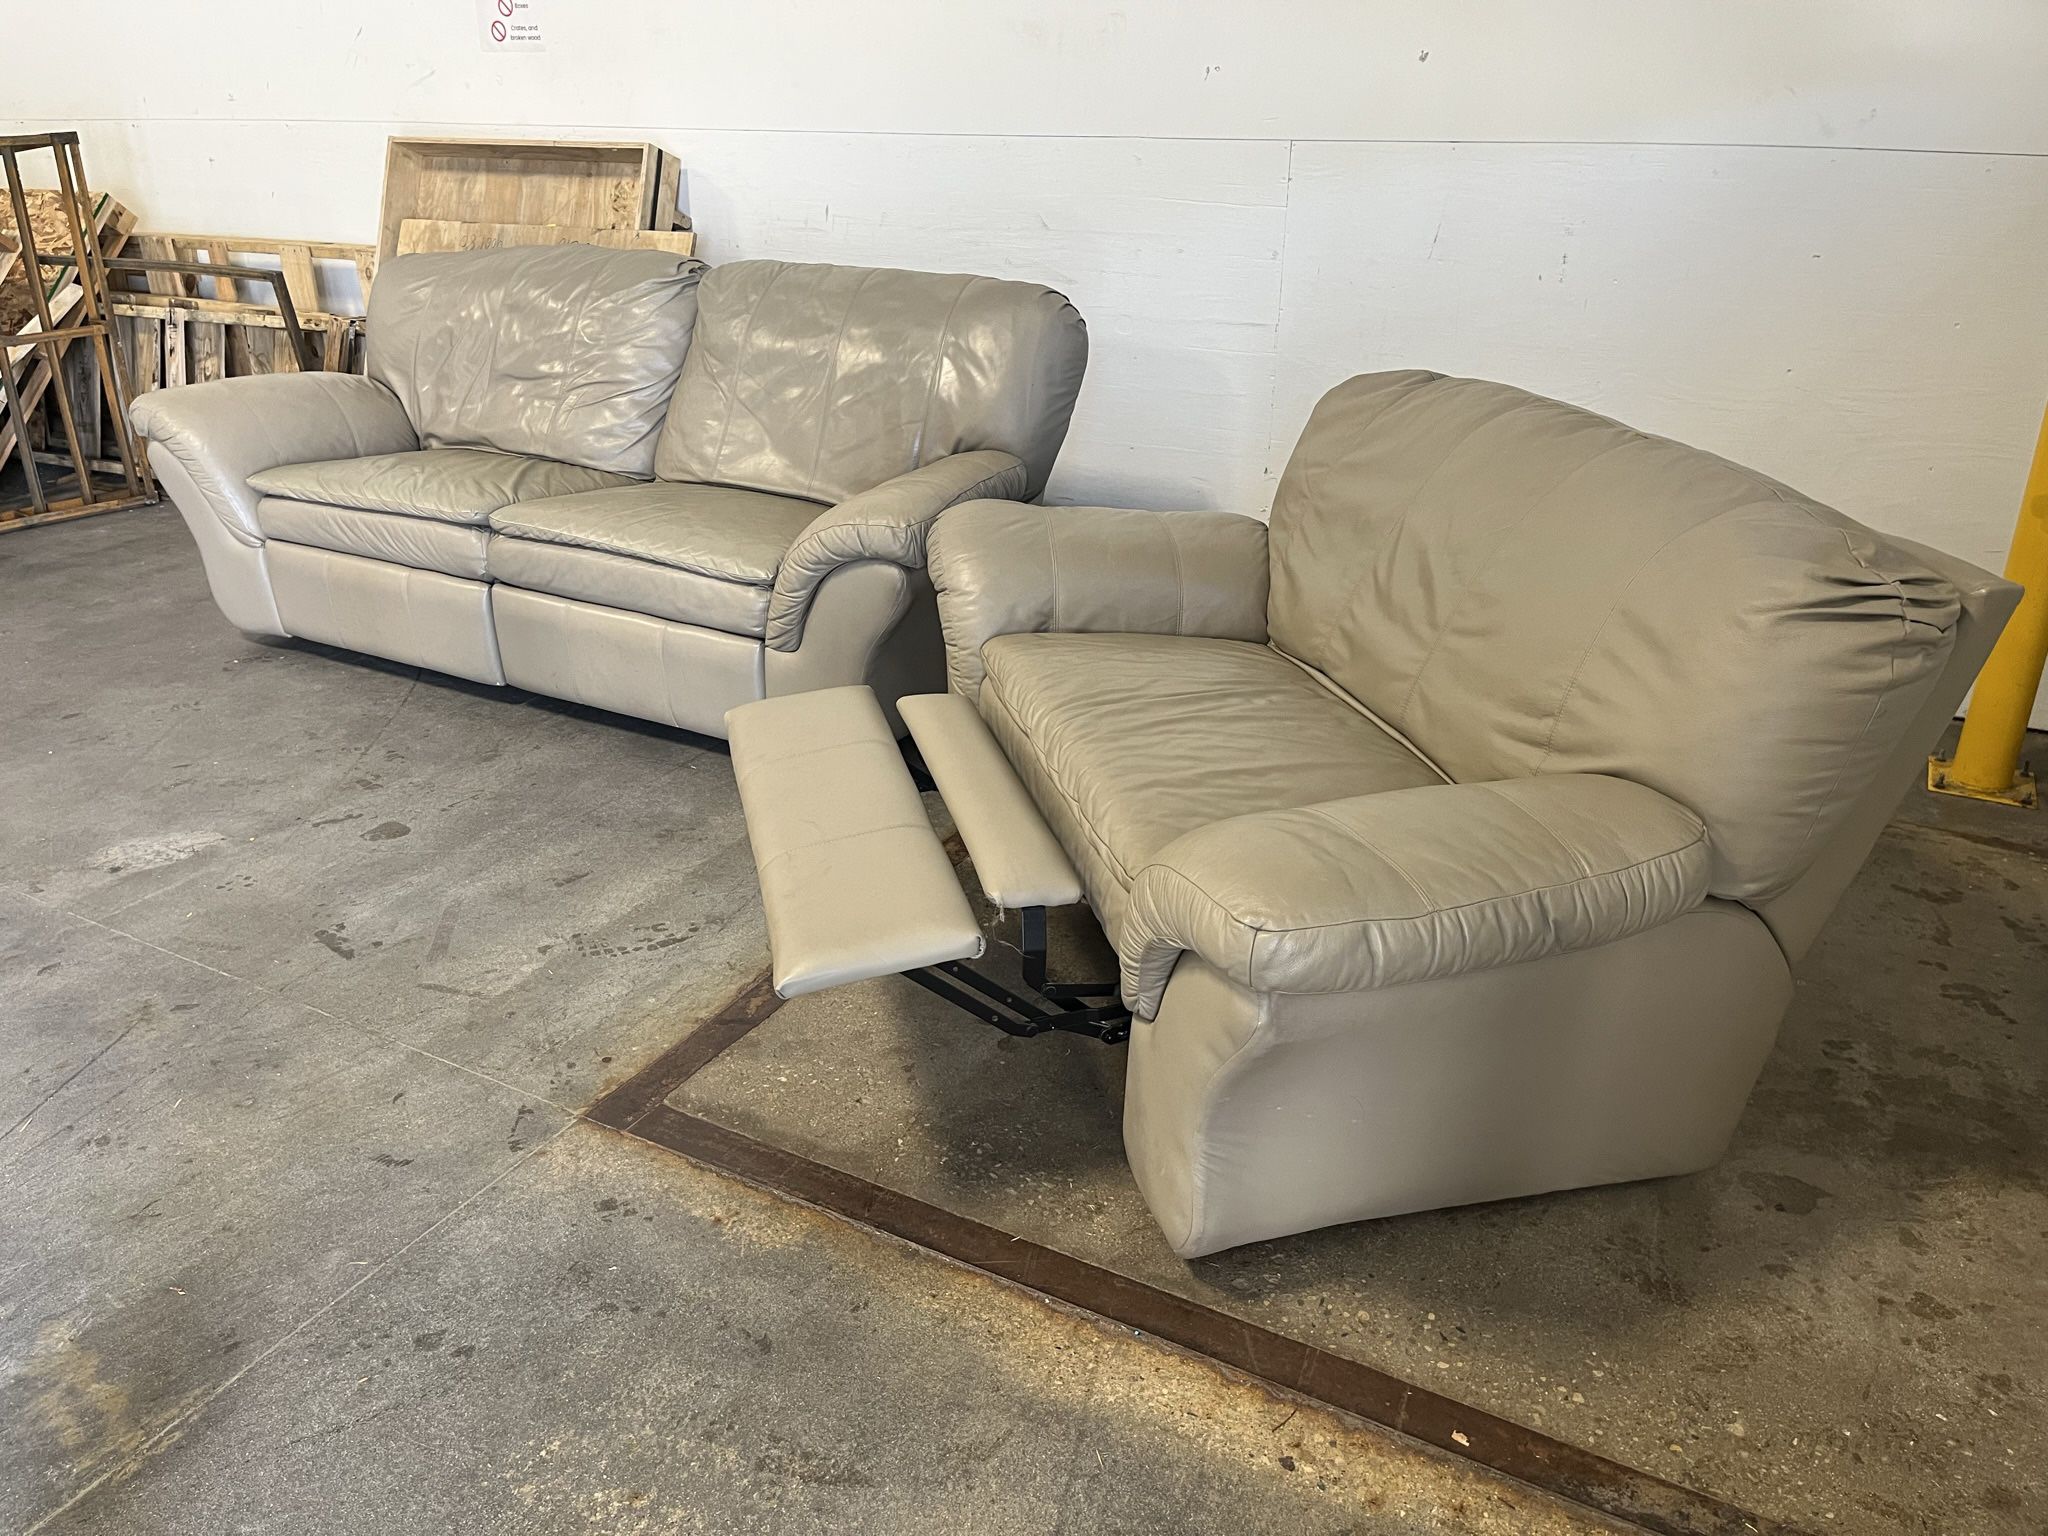 Genuine Leather Sofa & Oversized Recliner Chair Set - Comfy - Clean - Grey/Taupe Delivery Available 